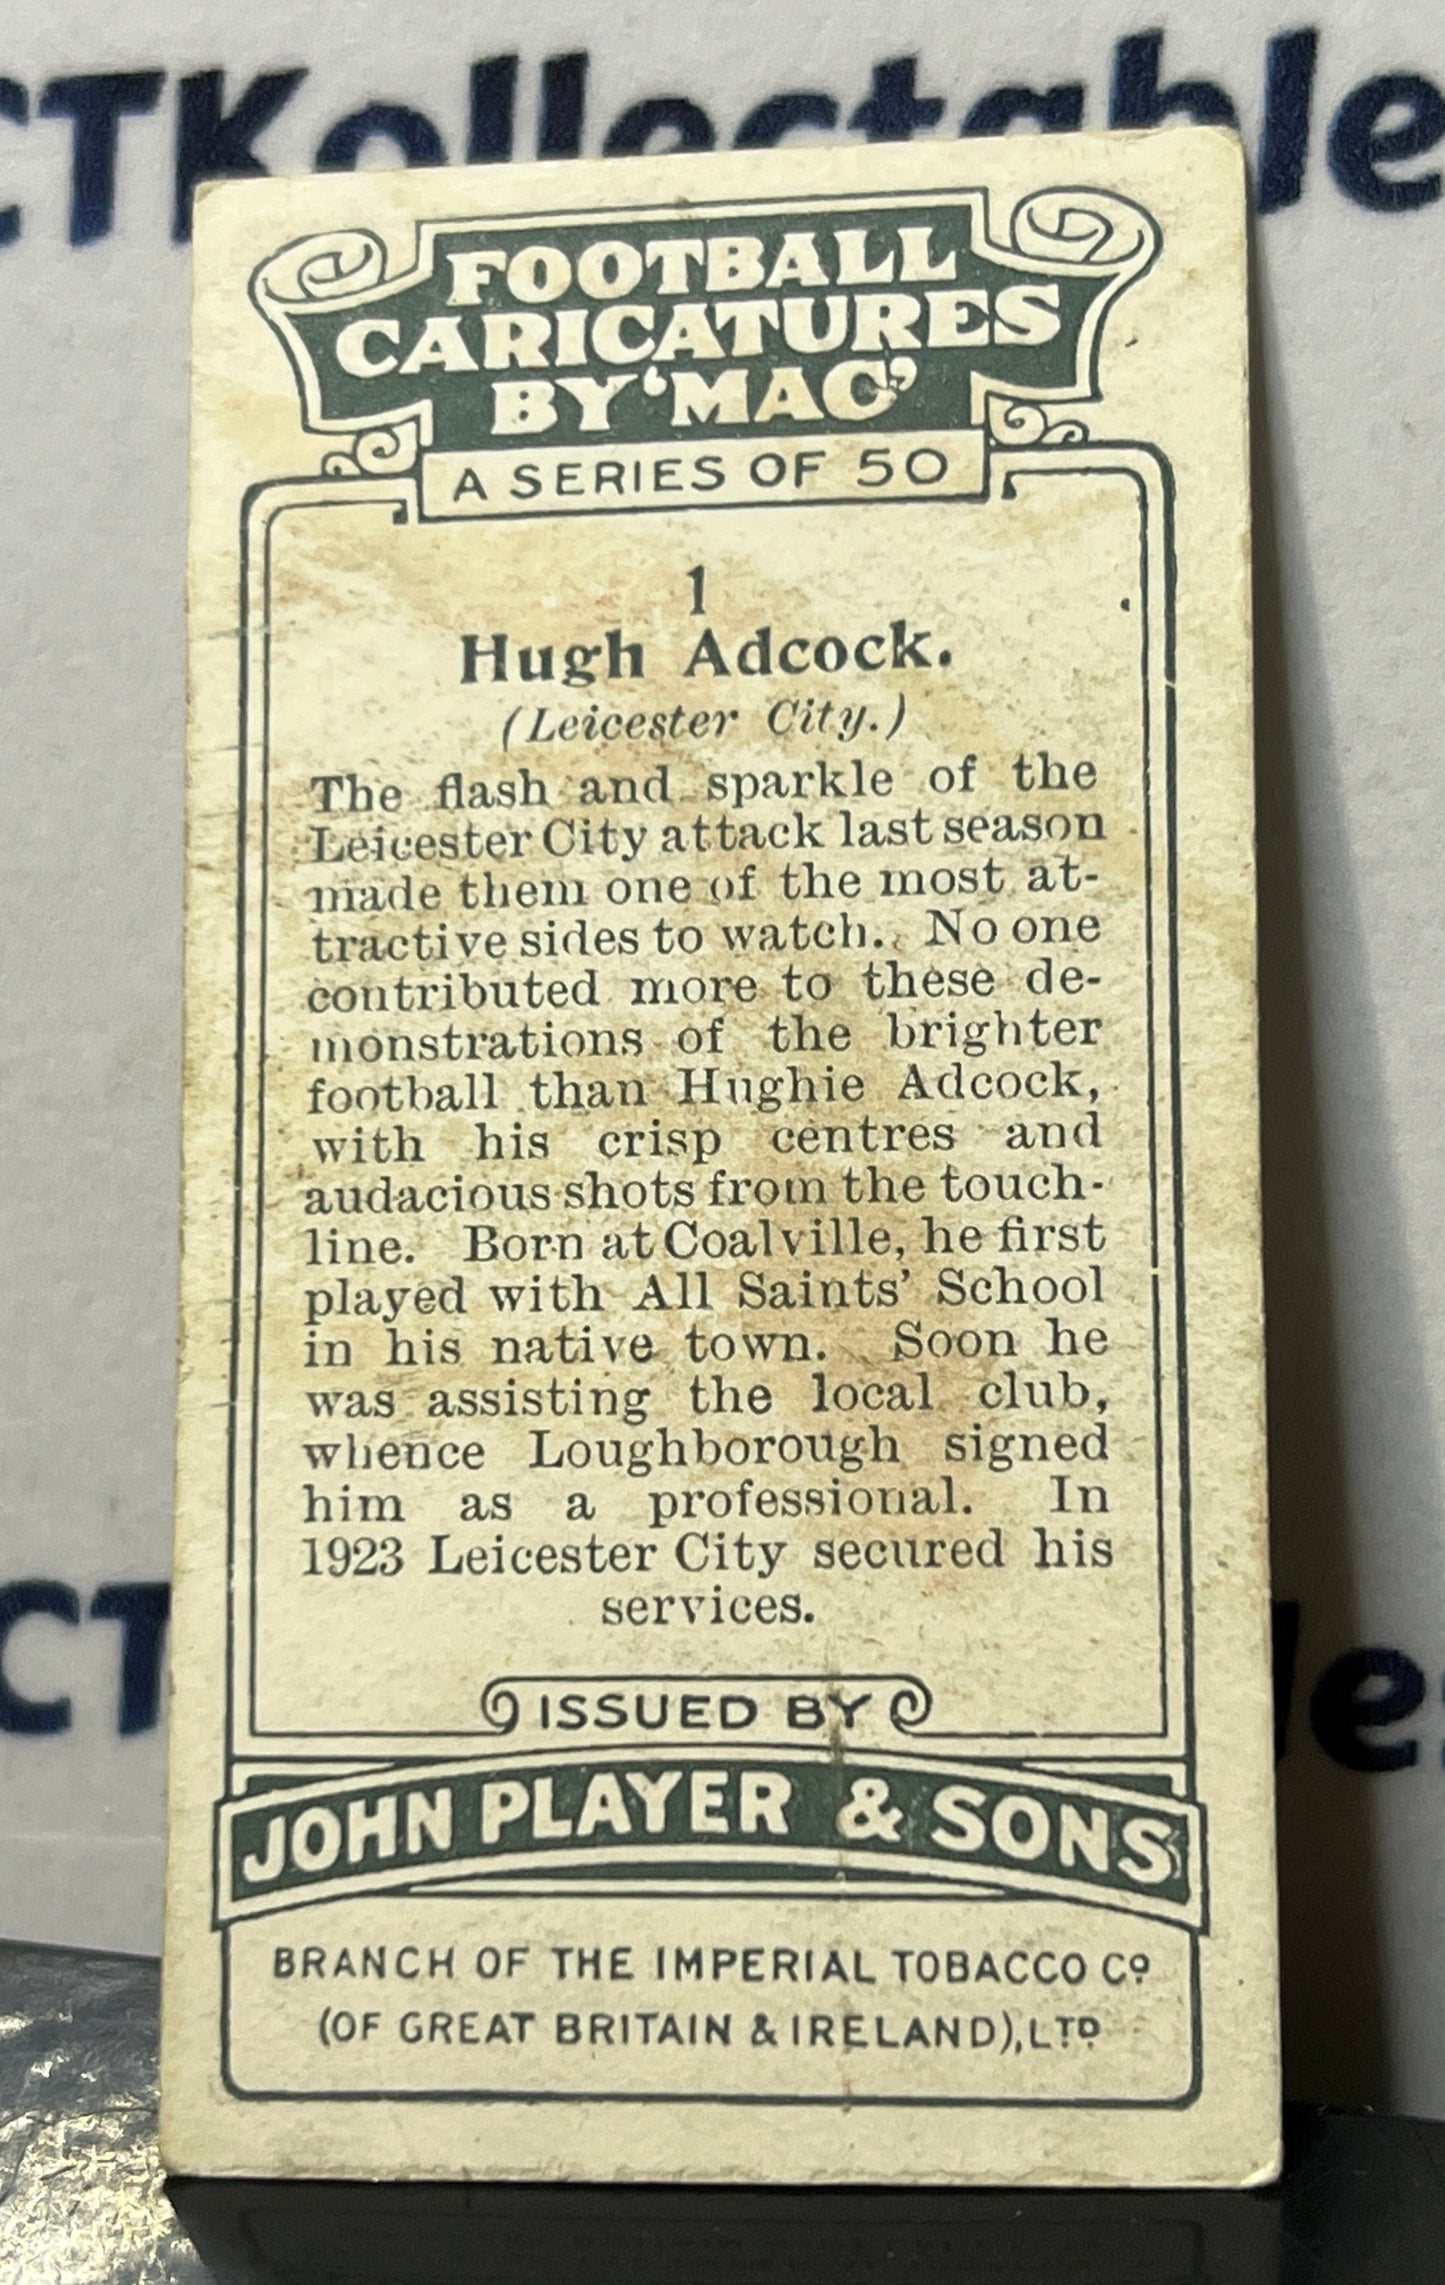 1927 FOOTBALL CARICATURES BY "MAC" JOHN PLAYER & SONS HUGH ADCOCK # 1 PLAYER'S CIGARETTES SOCCER CARD